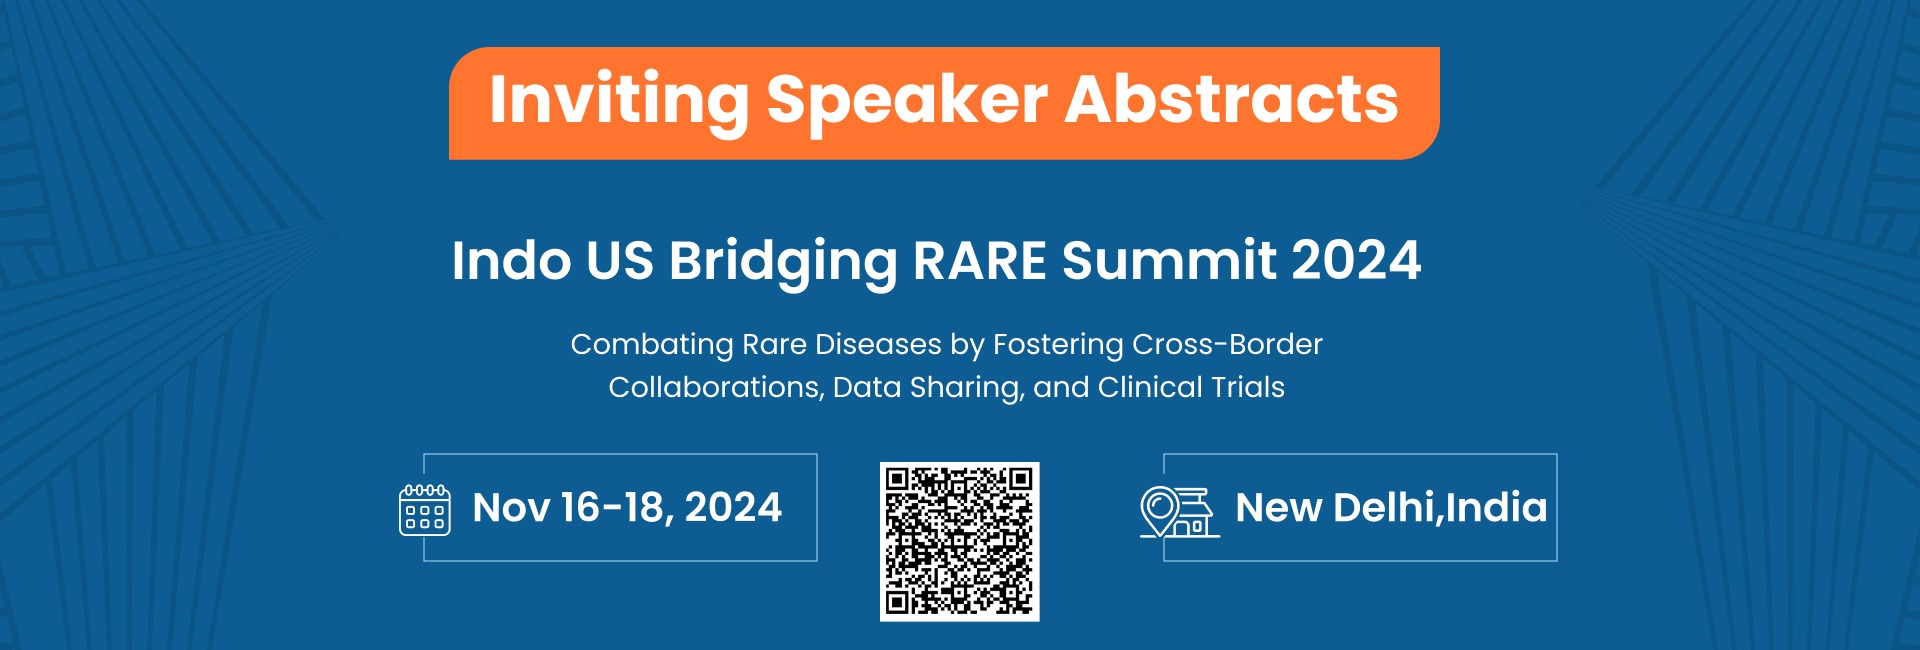 Speaker abstract of the Indo US Bridging RARE Summit 2024 on November 16 – 18, 2024.